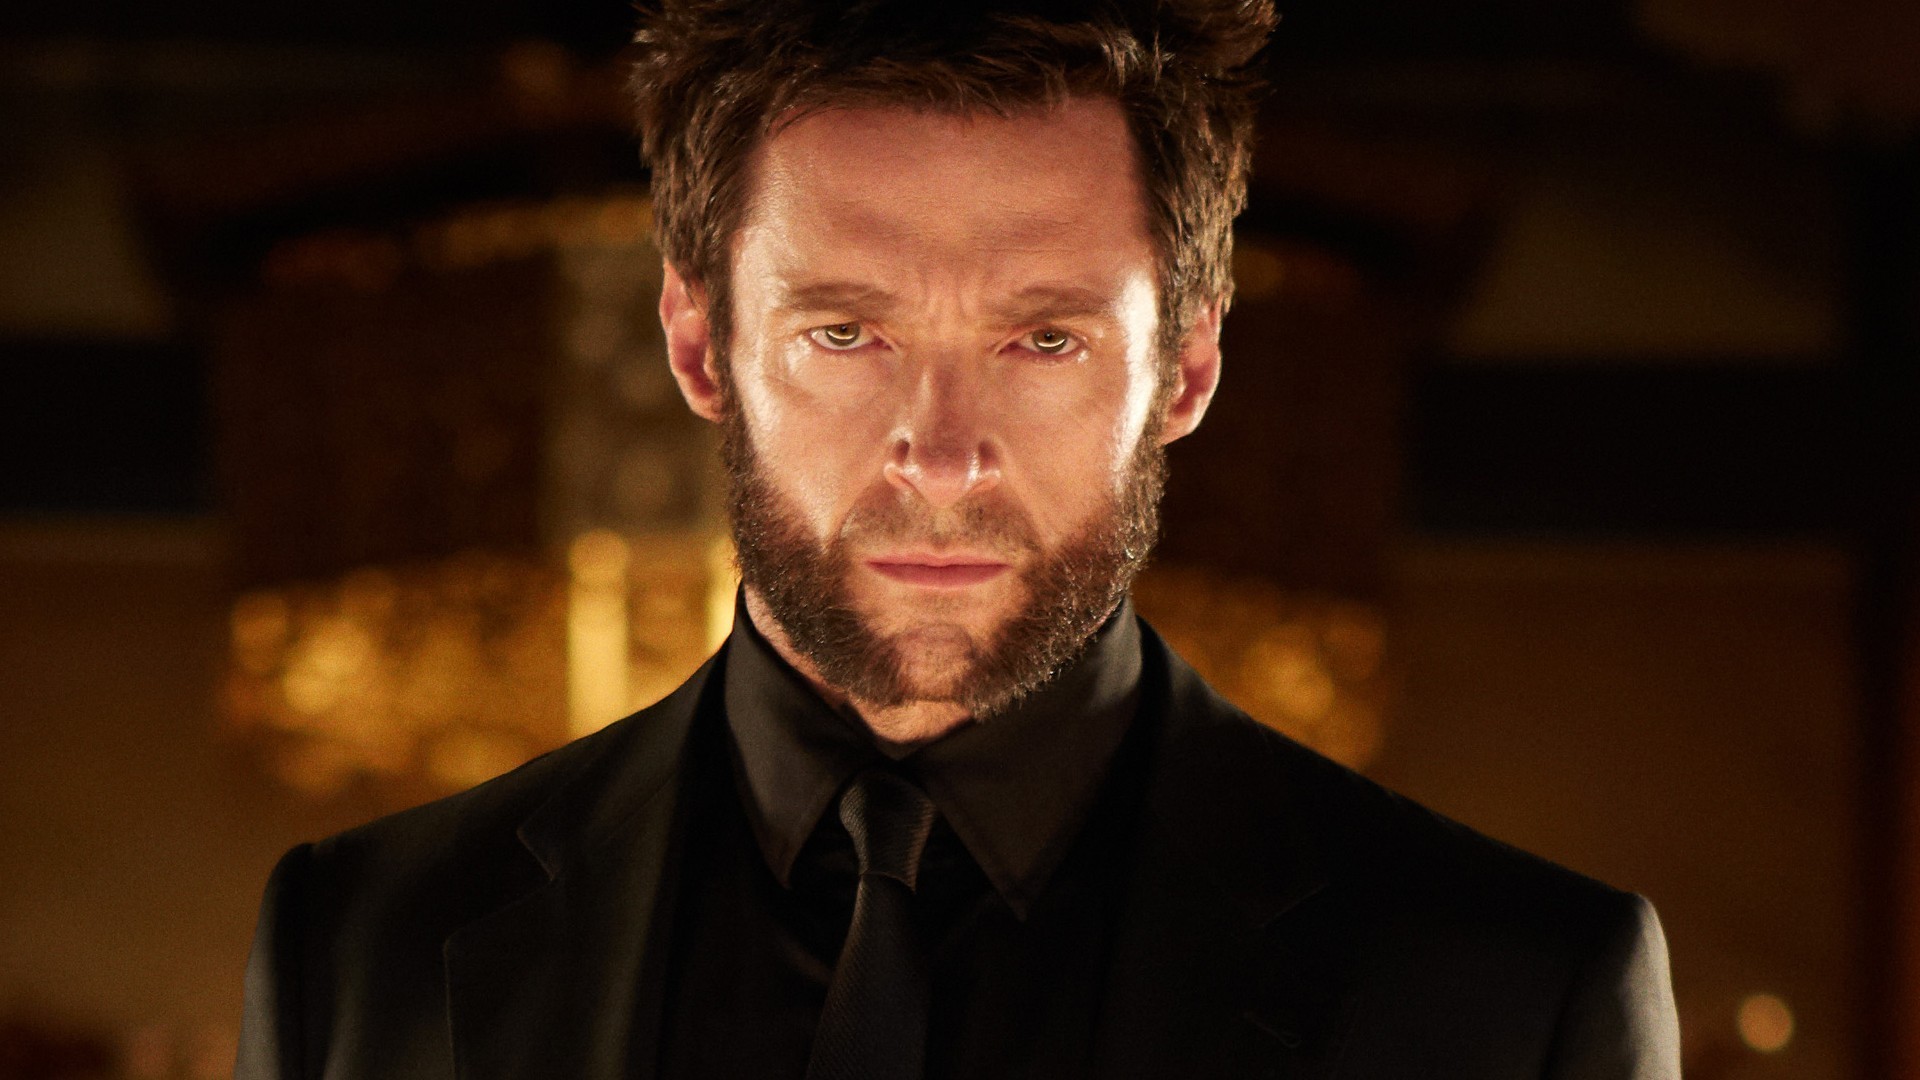 1920x1080 Explore Wolverine Movie, The Wolverine, and more!